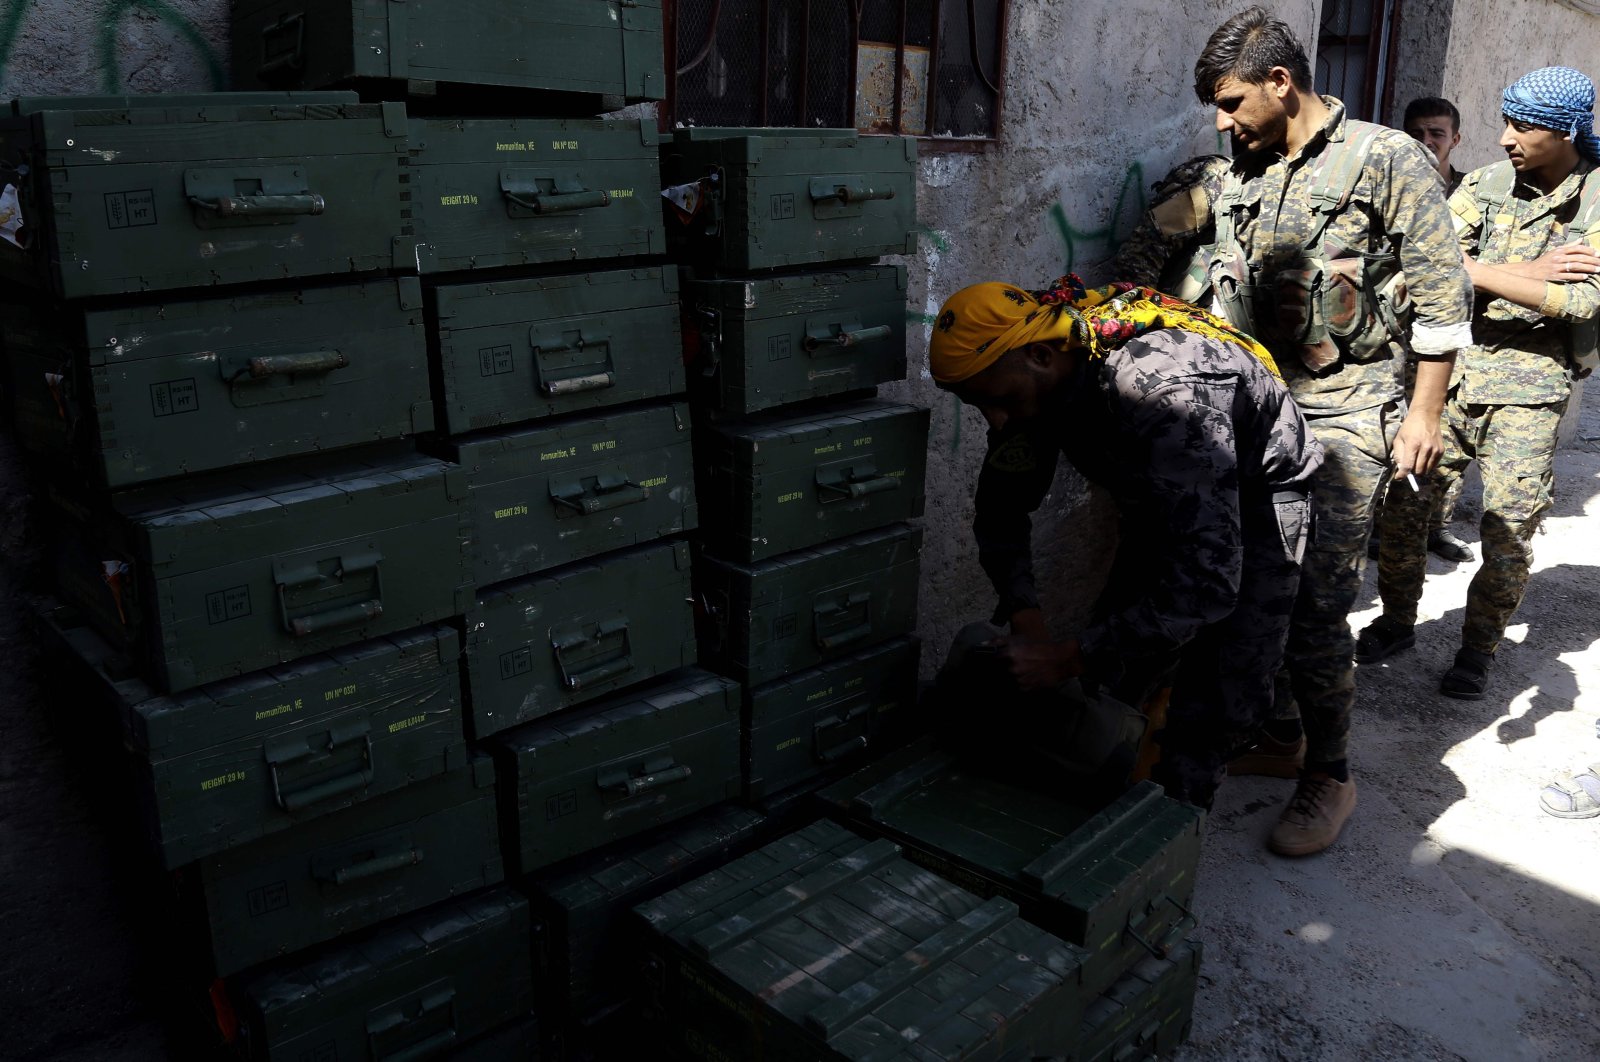 Members of the YPG, the PKK terrorist group's Syrian branch, unload boxes of ammunition supplied by the U.S.-led coalition in a village north of Raqqa, northeastern Syria, June 7, 2017. (AFP Photo)